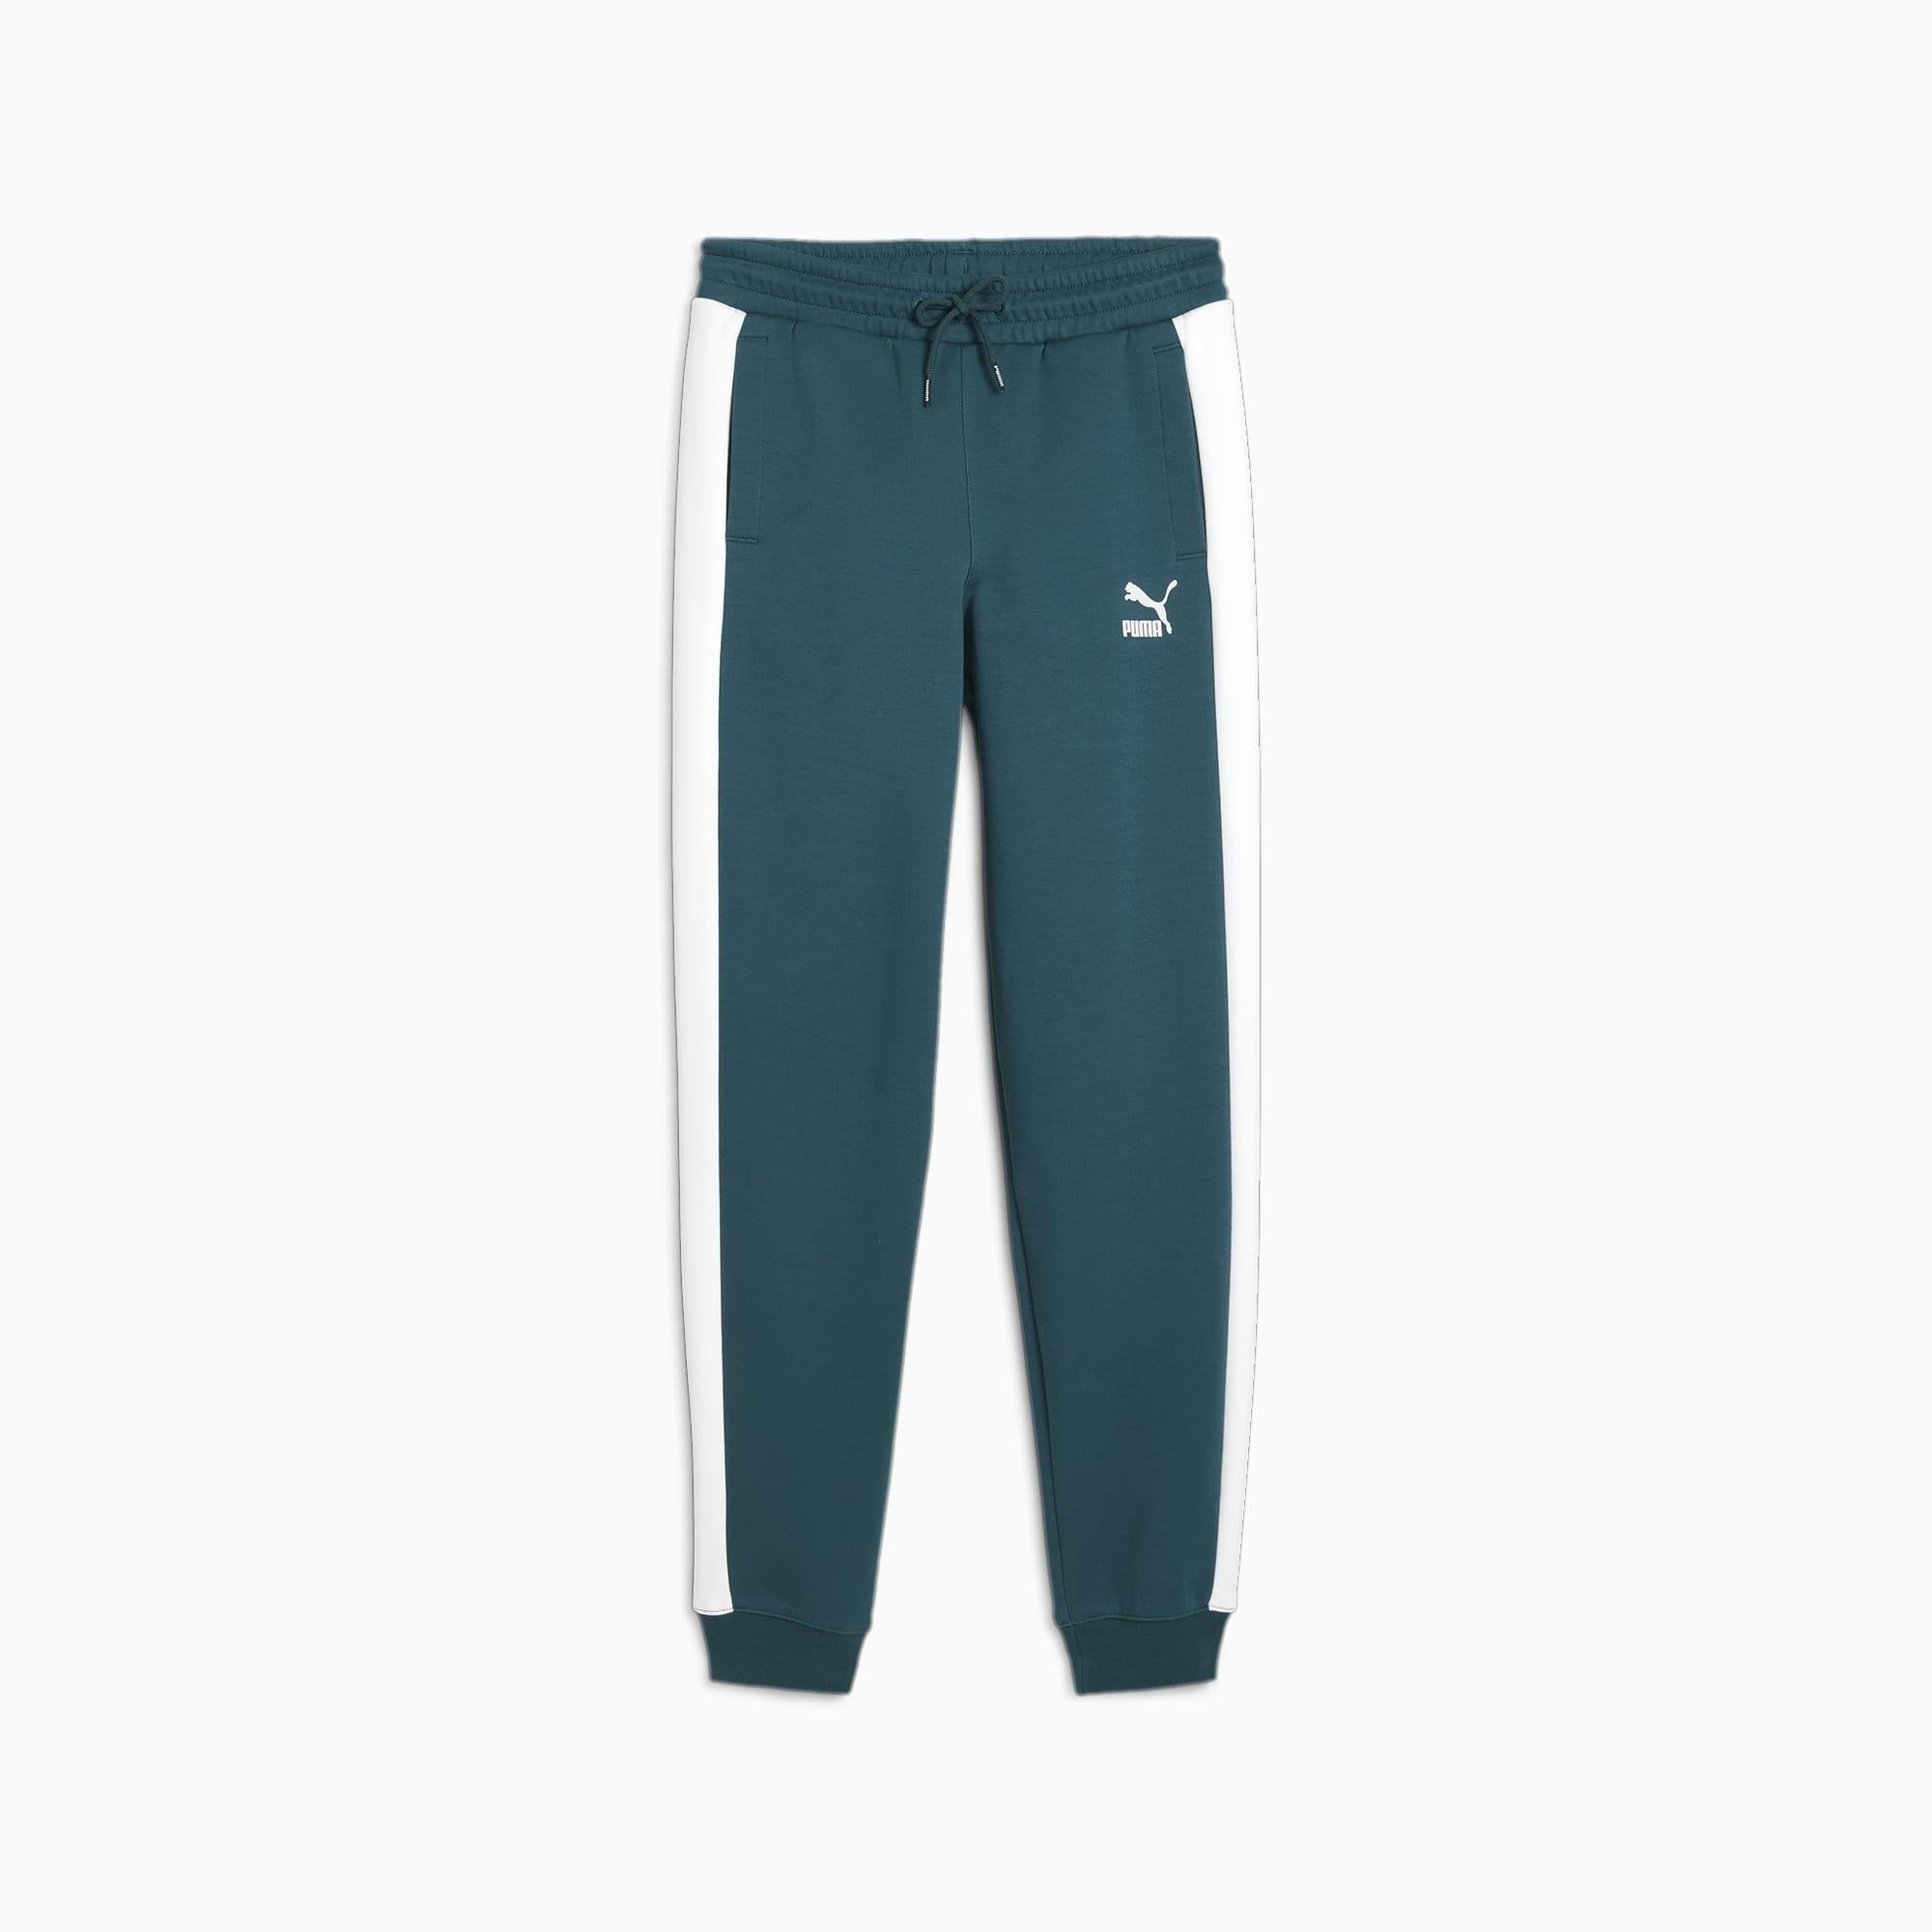 Iconic T7 Boys' Track Pants by PUMA